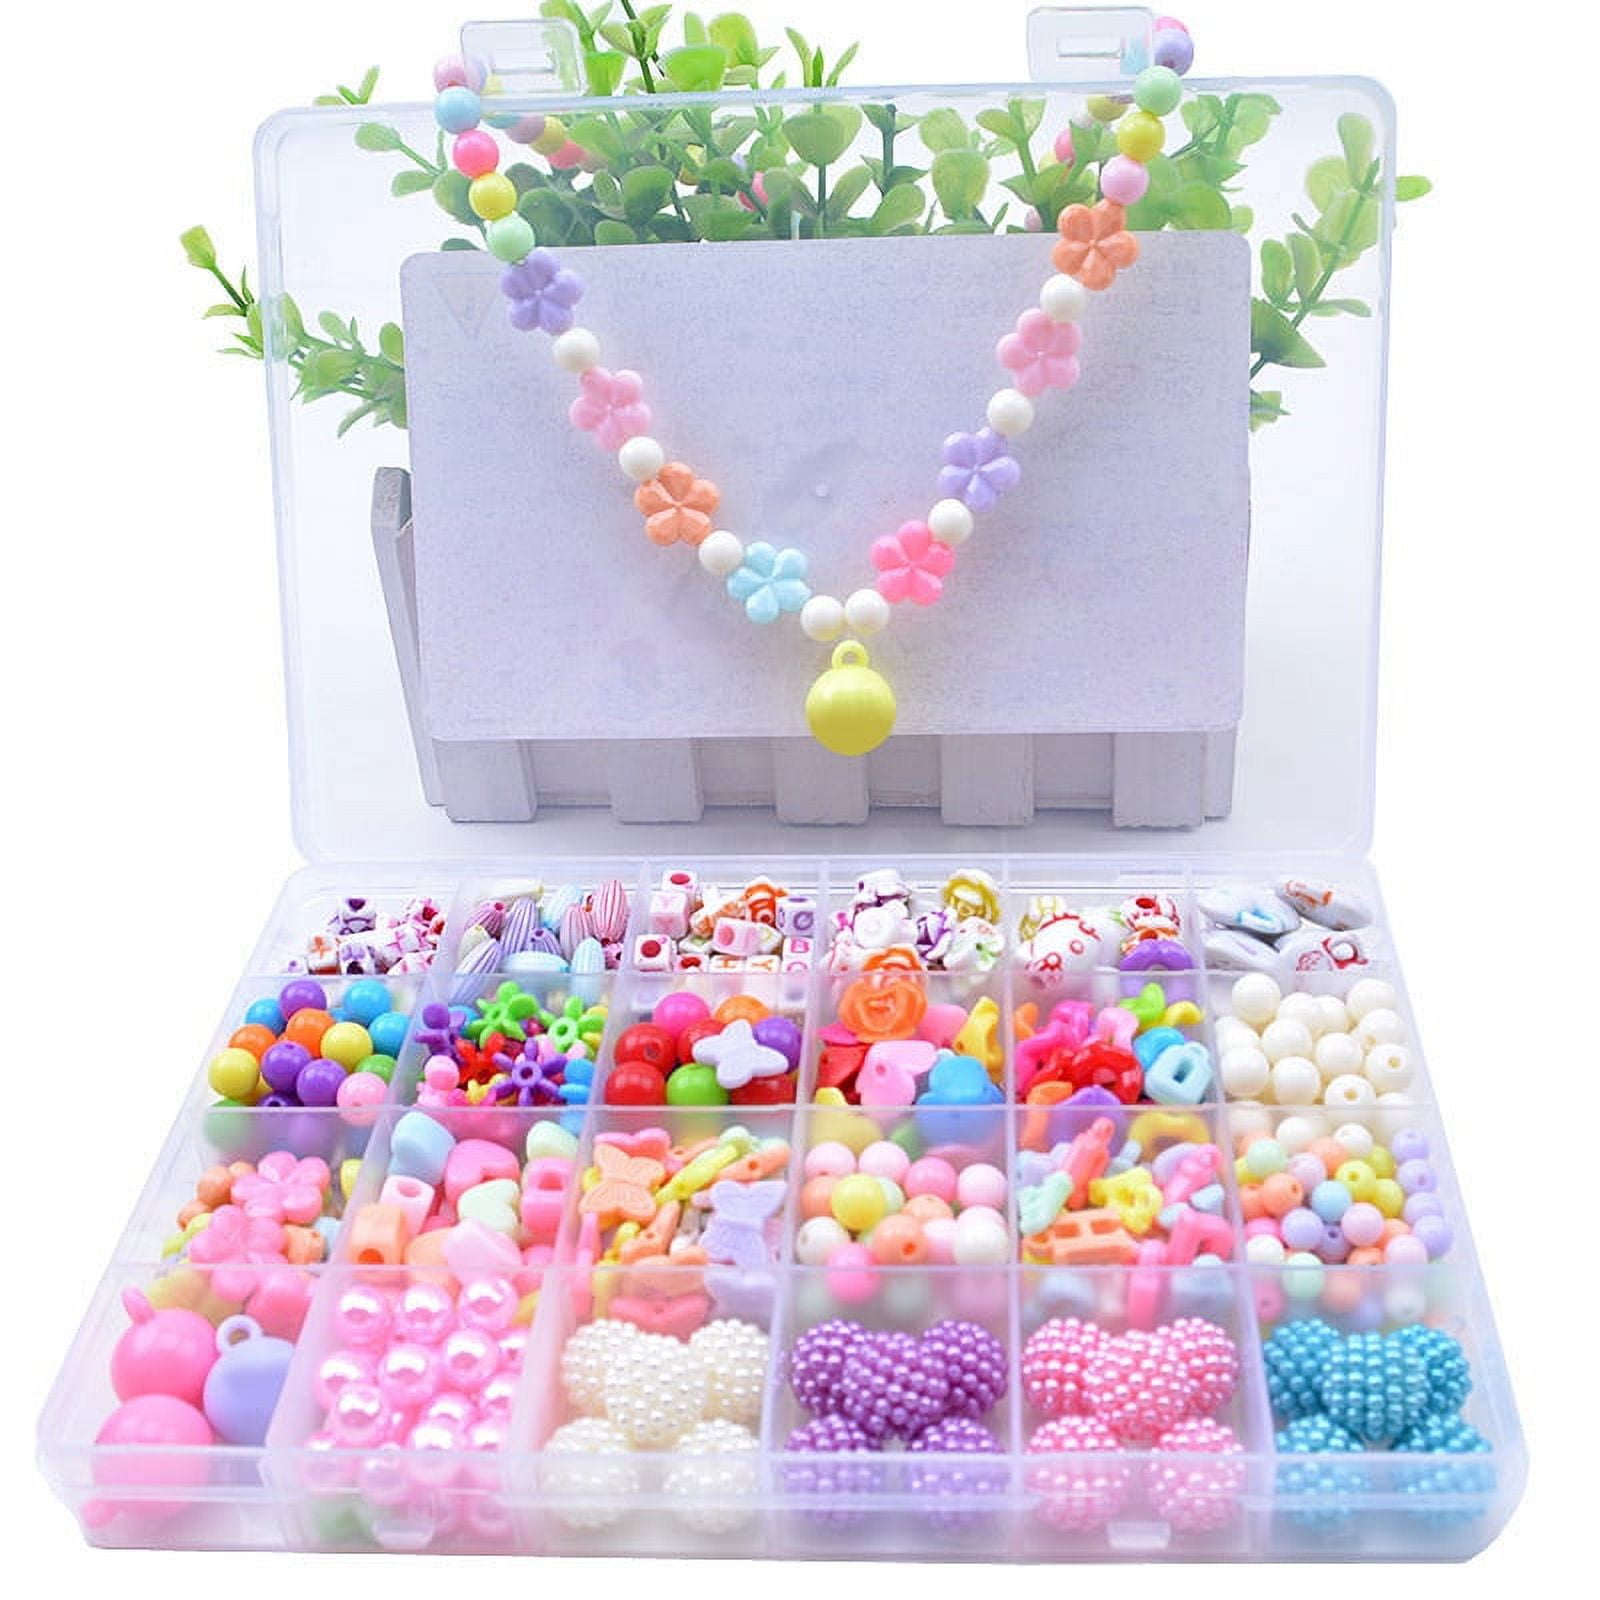 DIY Beads Set with 4 Packs String 24 Different Types and Shapes Colorful Acrylic Beads in A Box for Children Necklace and Bracelet Crafts by STSTECH